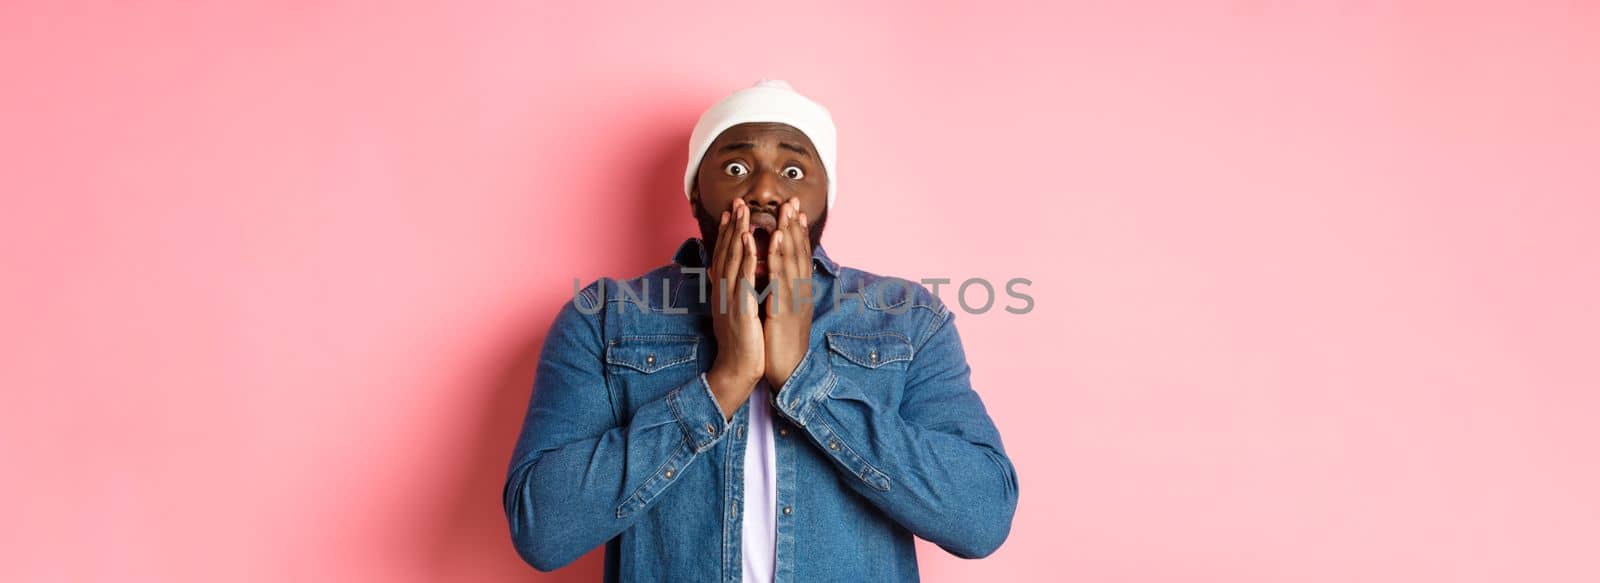 Alarmed and worried Black man staring at bad accident, gasping and standing in panic over pink background by Benzoix